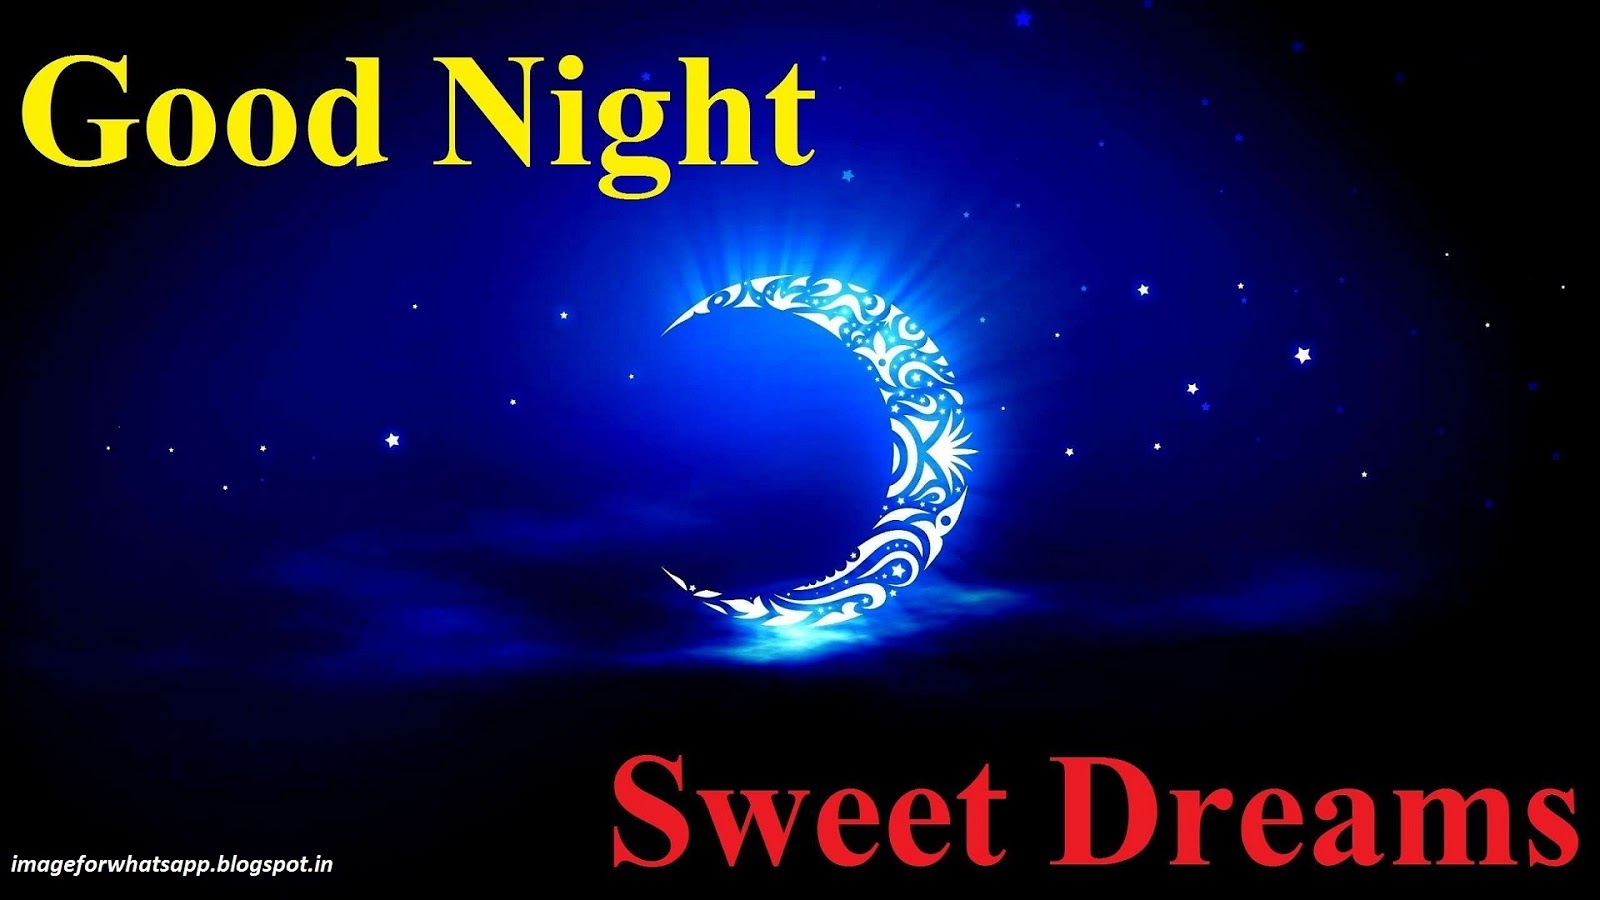 Images for WhatsApp: Good Night Sweet Dreams Hd Images